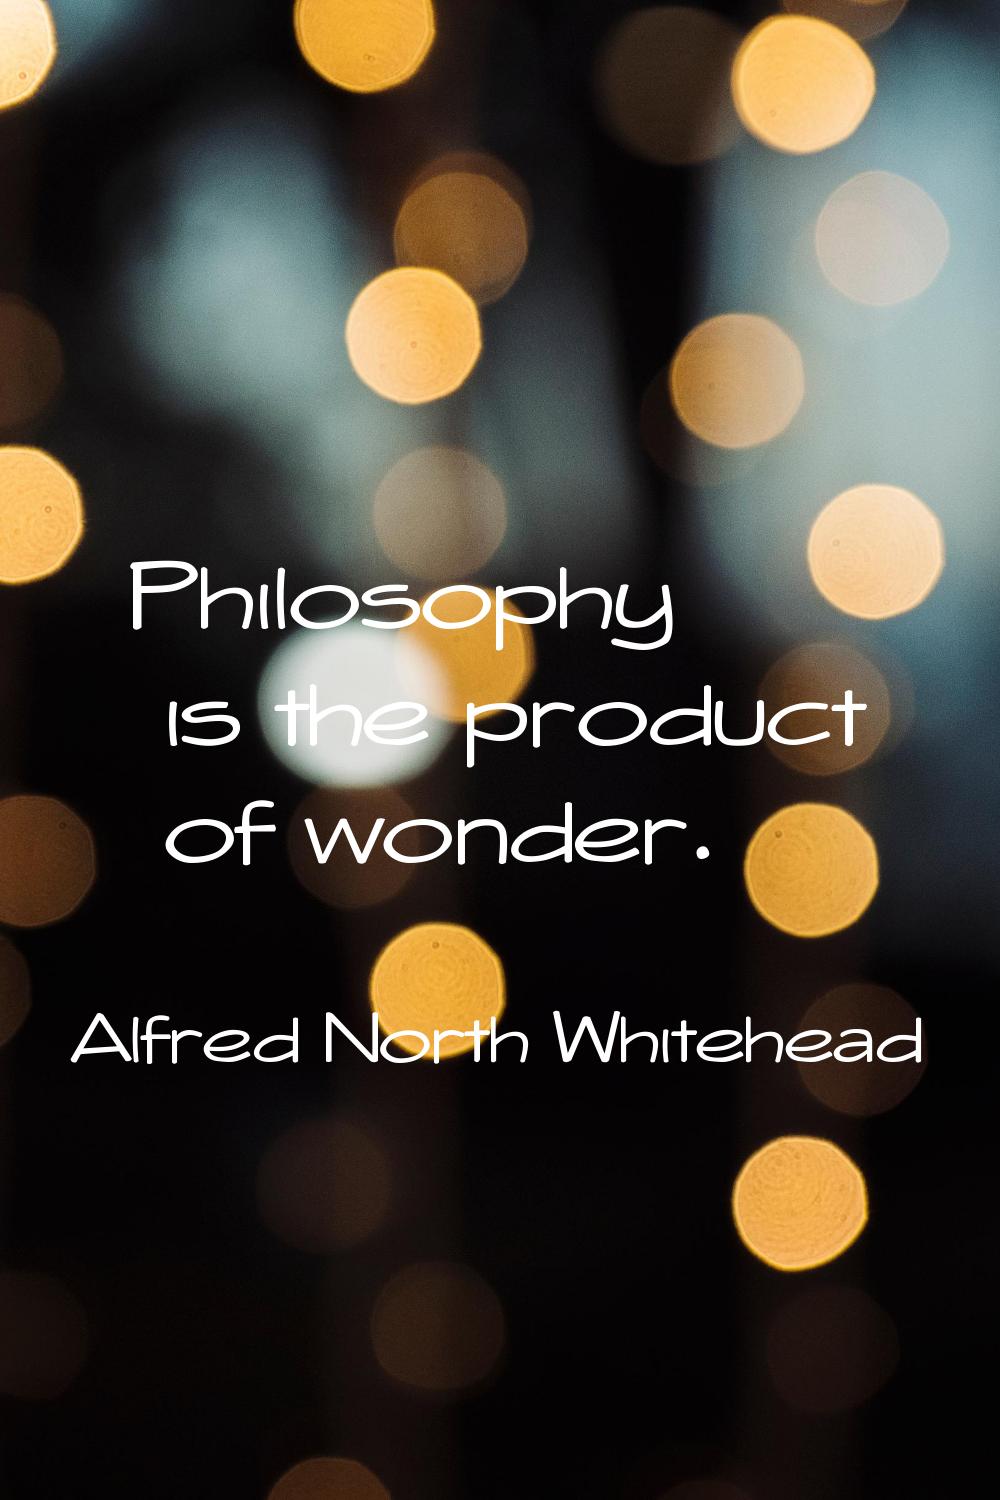 Philosophy is the product of wonder.